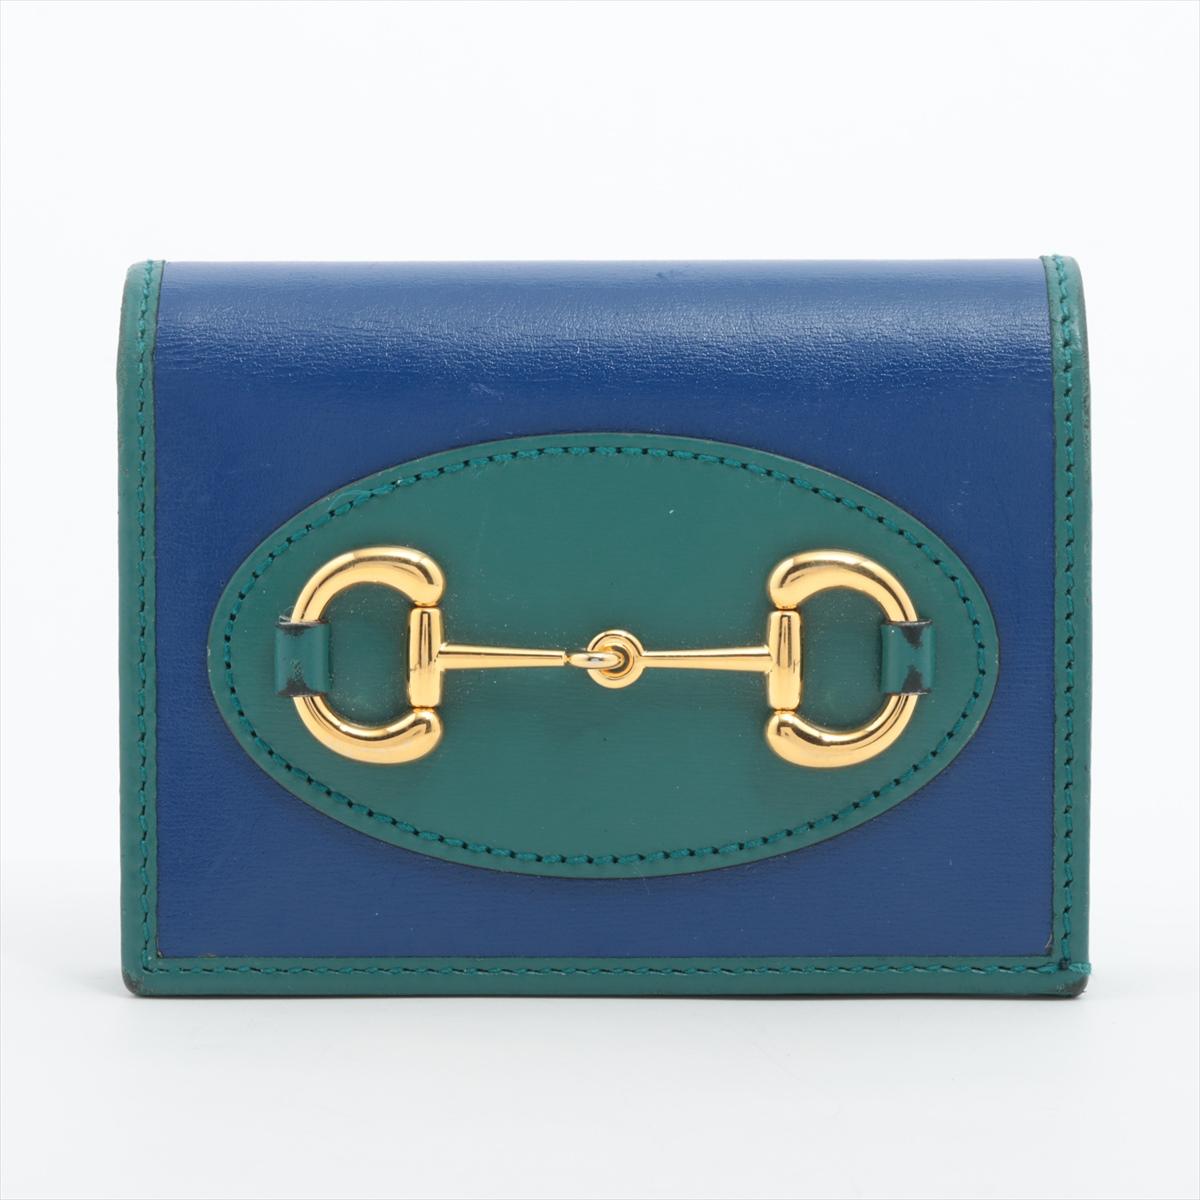 The Gucci Horse Bits Leather Compact Wallet in Blue and Green is a stylish and compact accessory that effortlessly blends luxury with vibrant colors. Crafted from high-quality leather, the wallet features the iconic horse-bite motif, showcasing